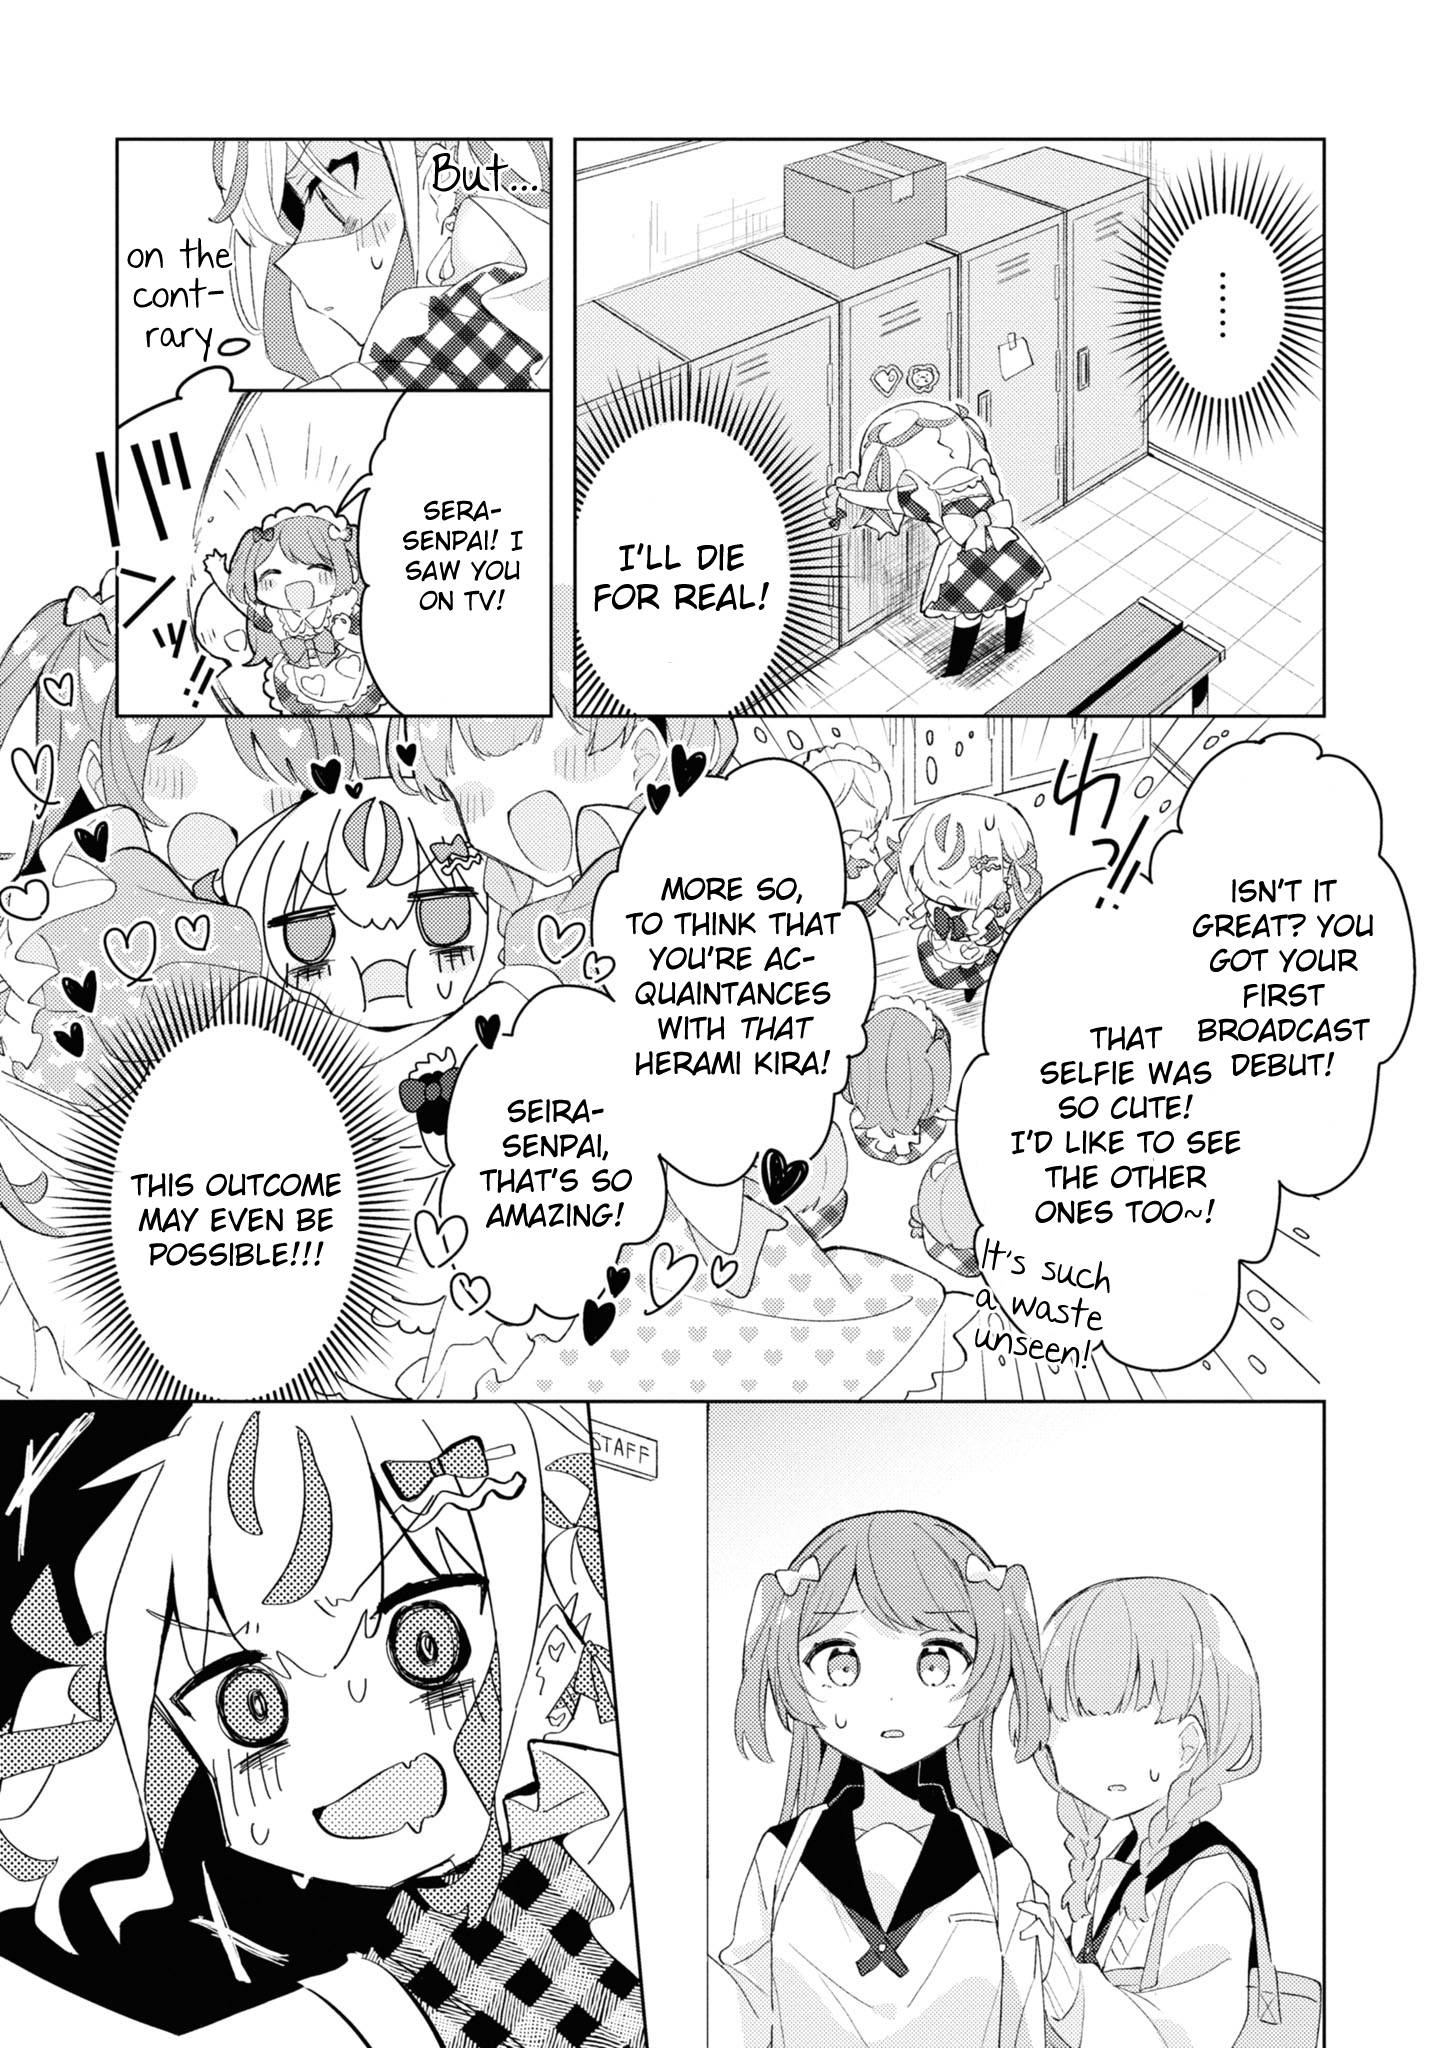 Insecure Herami Sisters - chapter 2 - #5